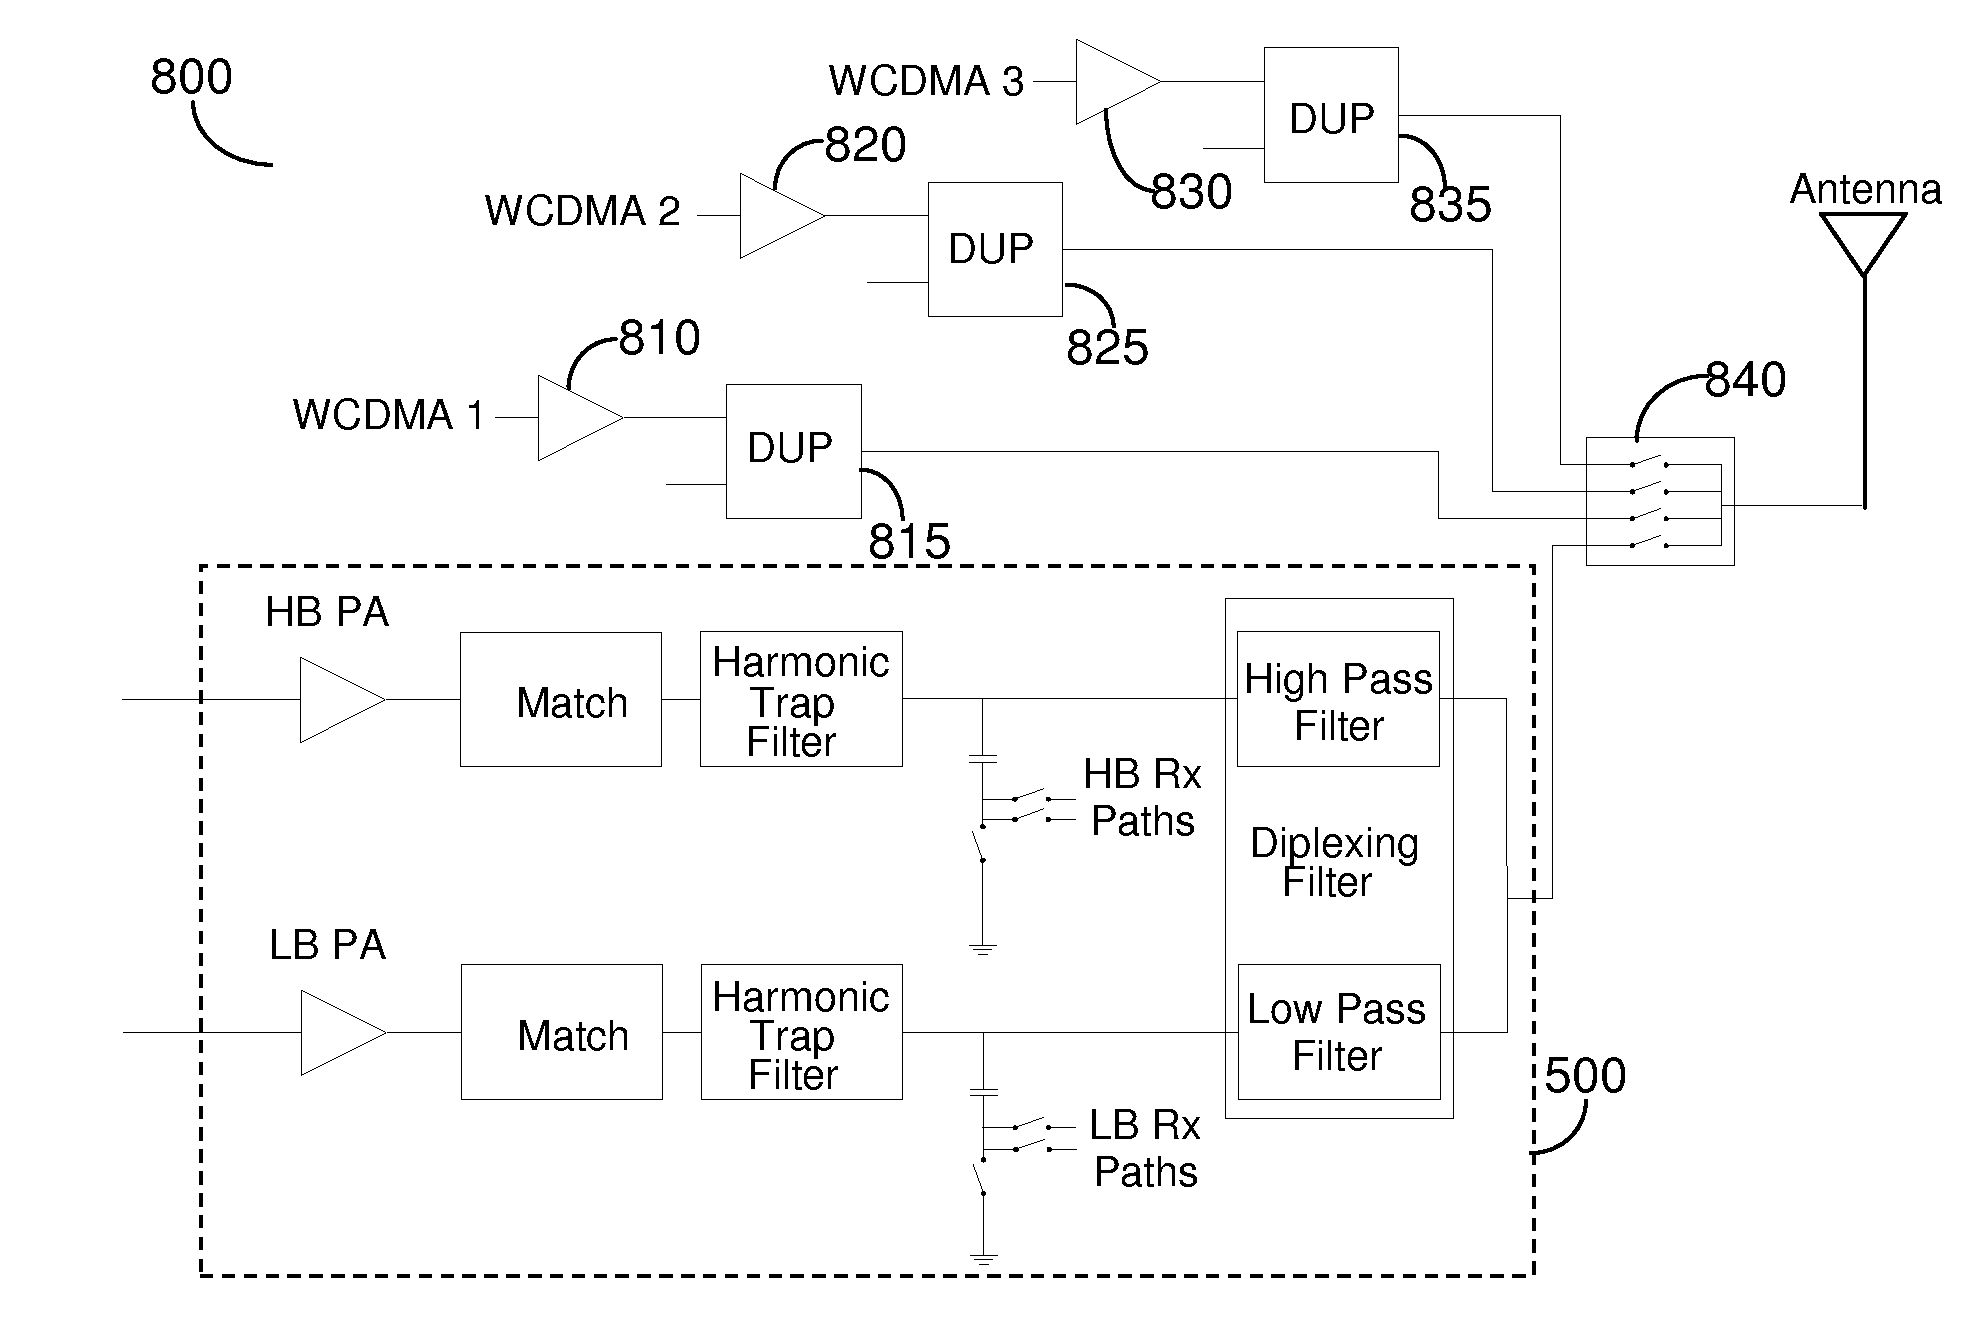 CMOS Switching Circuitry of a Transmitter Module